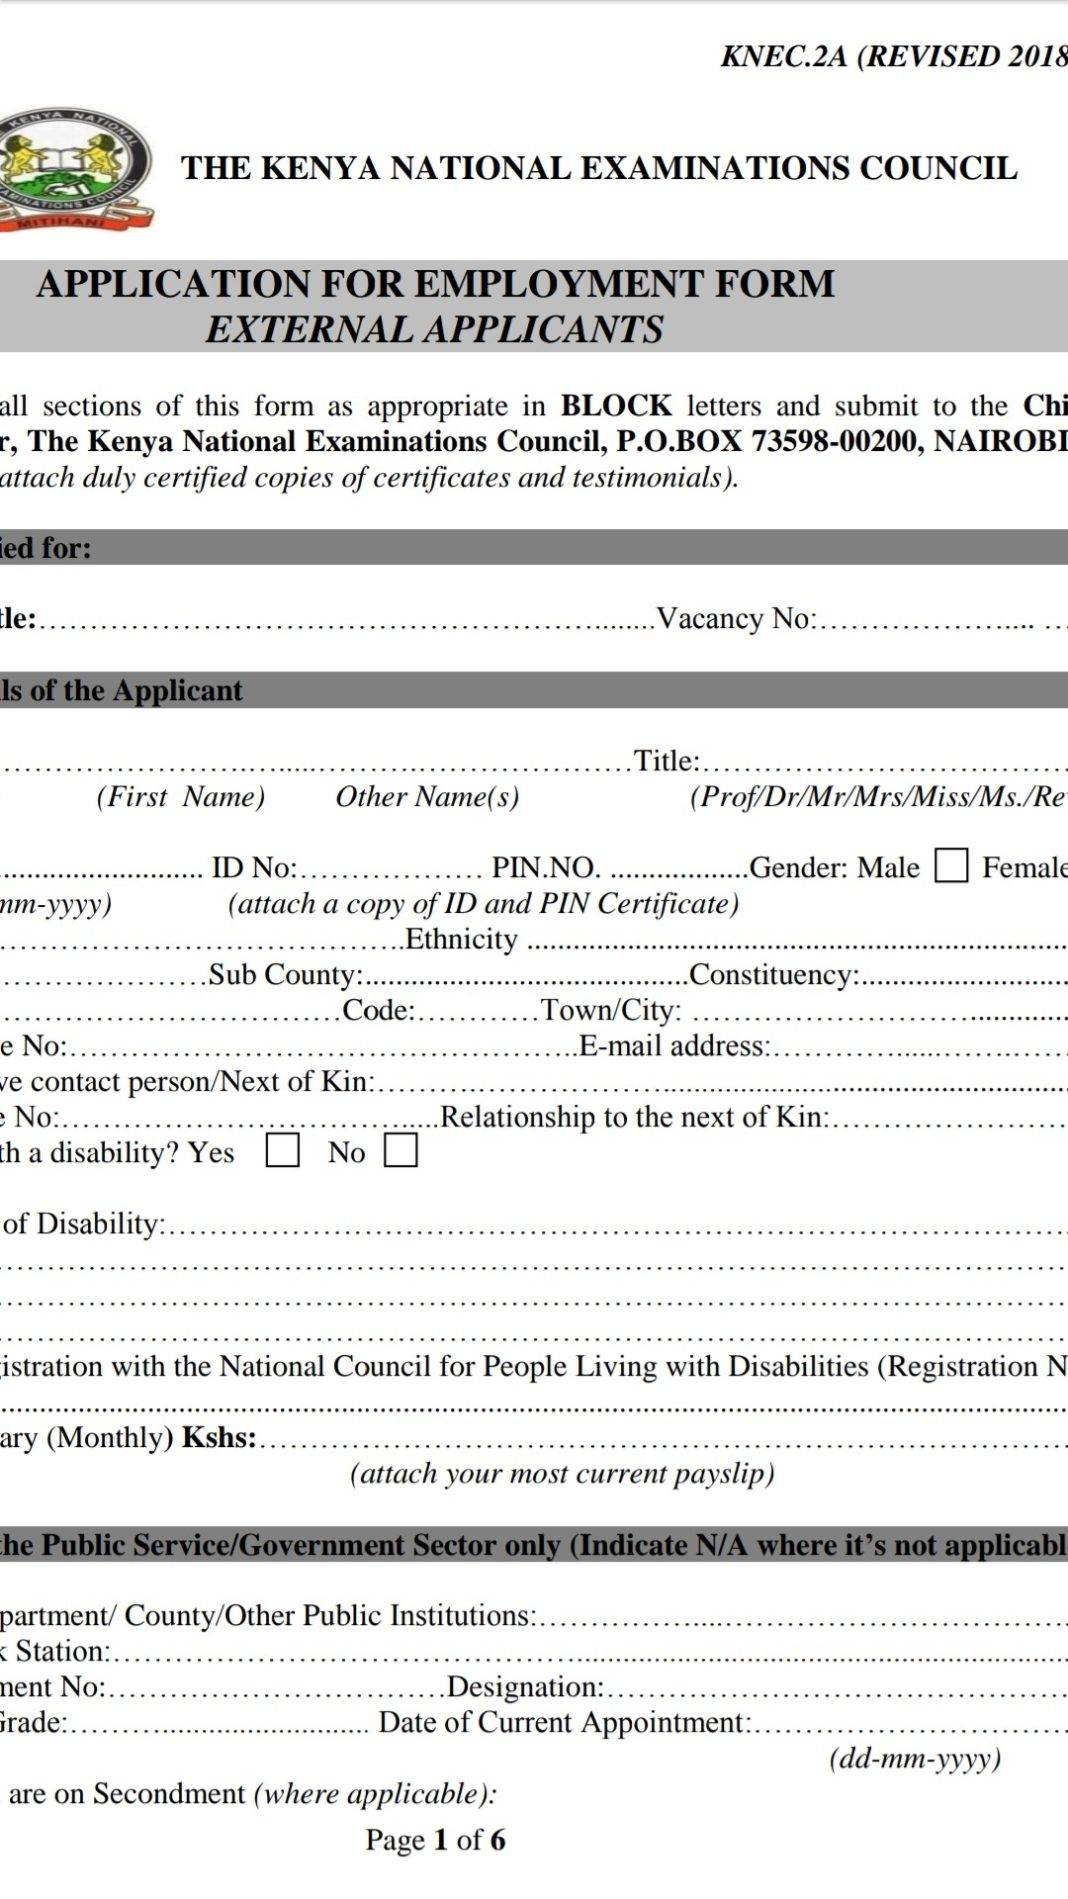 The KNEC employment application form free pdf download.